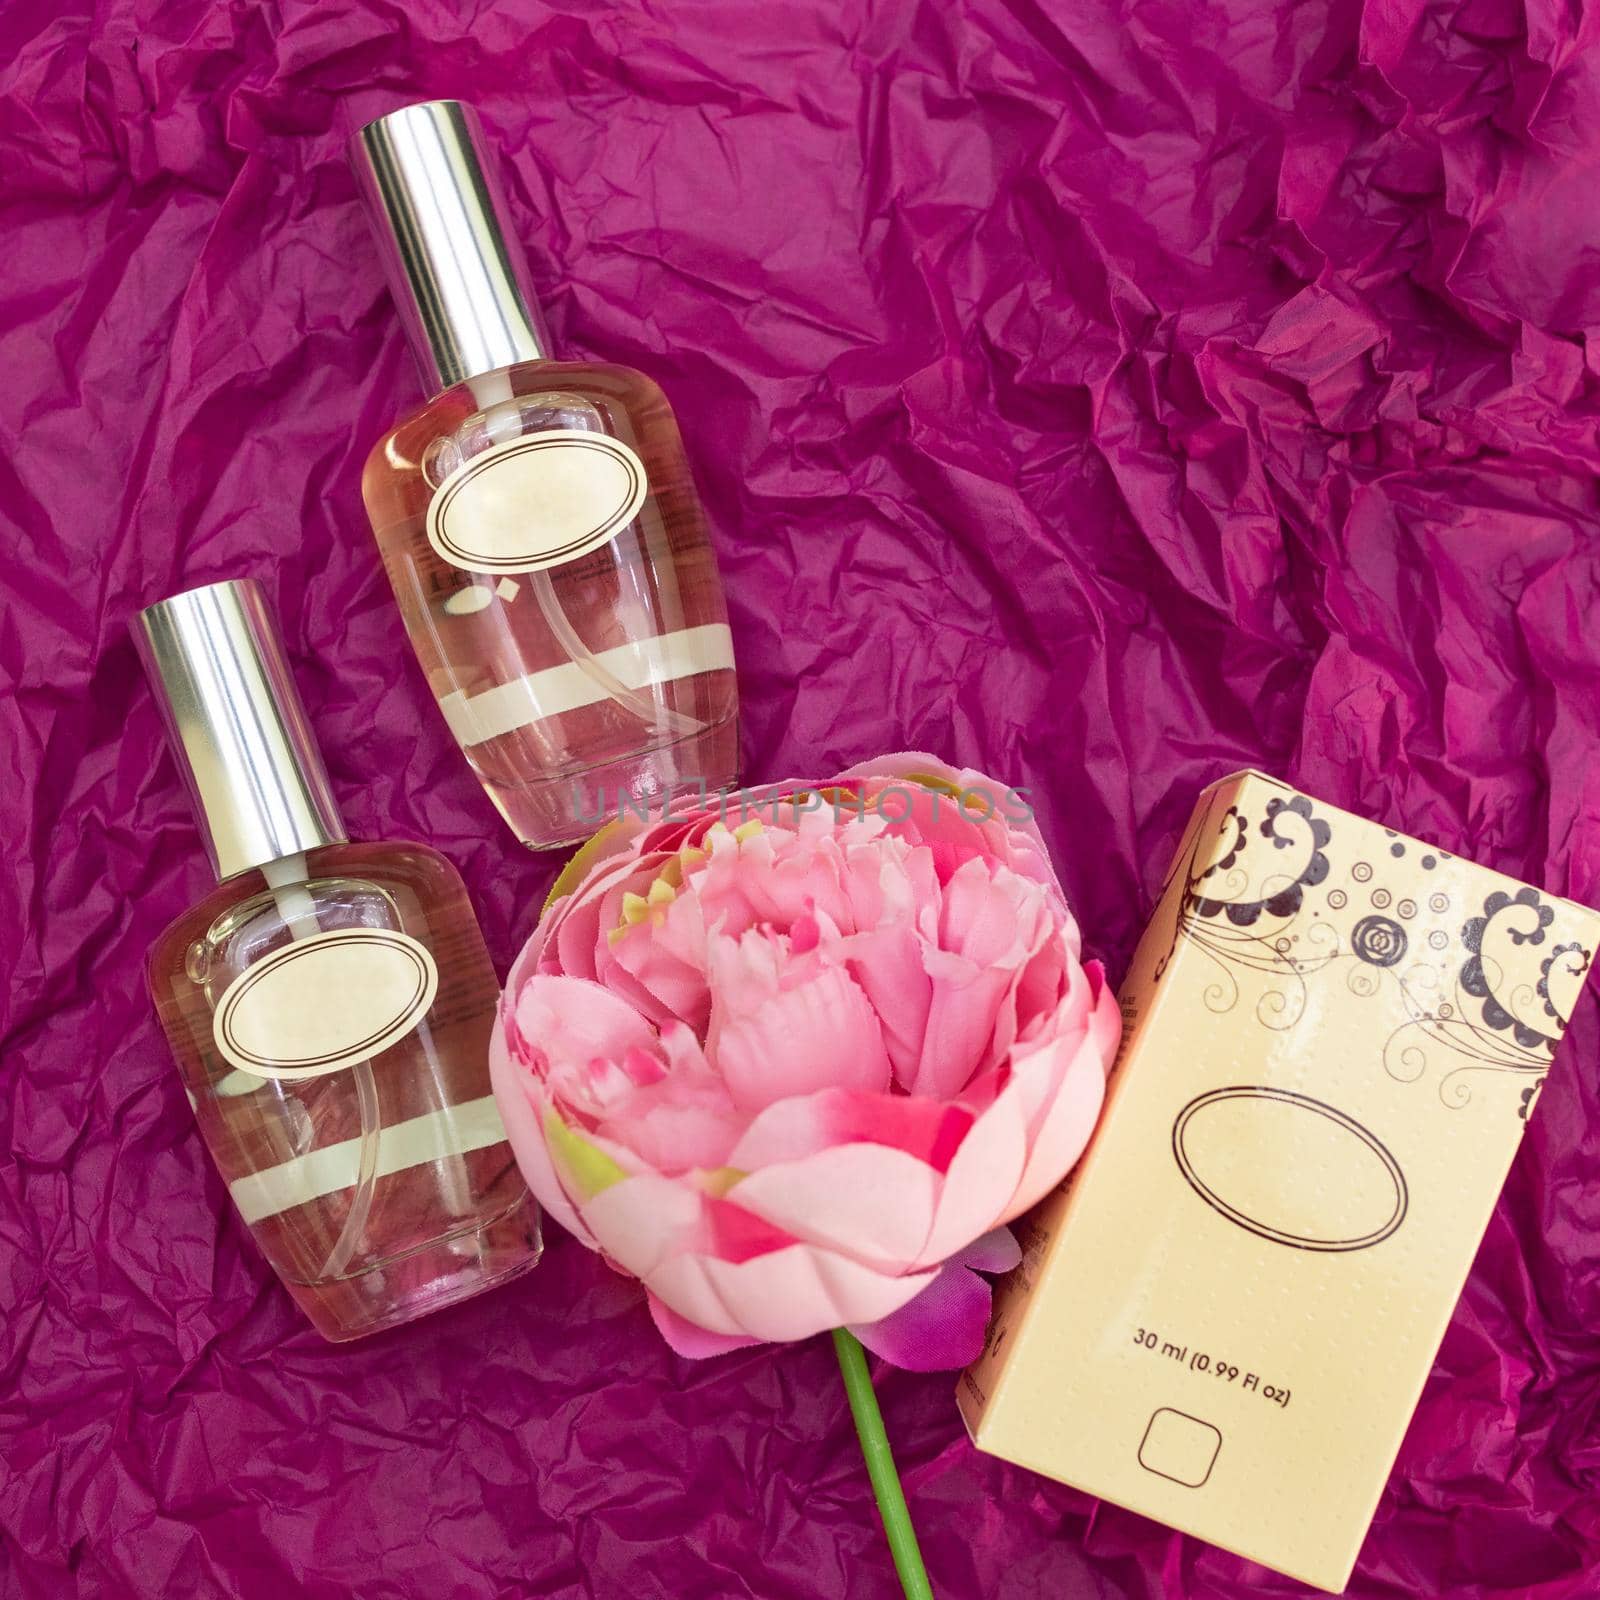 Perfume flacon with rose on the colorful background by ferhad